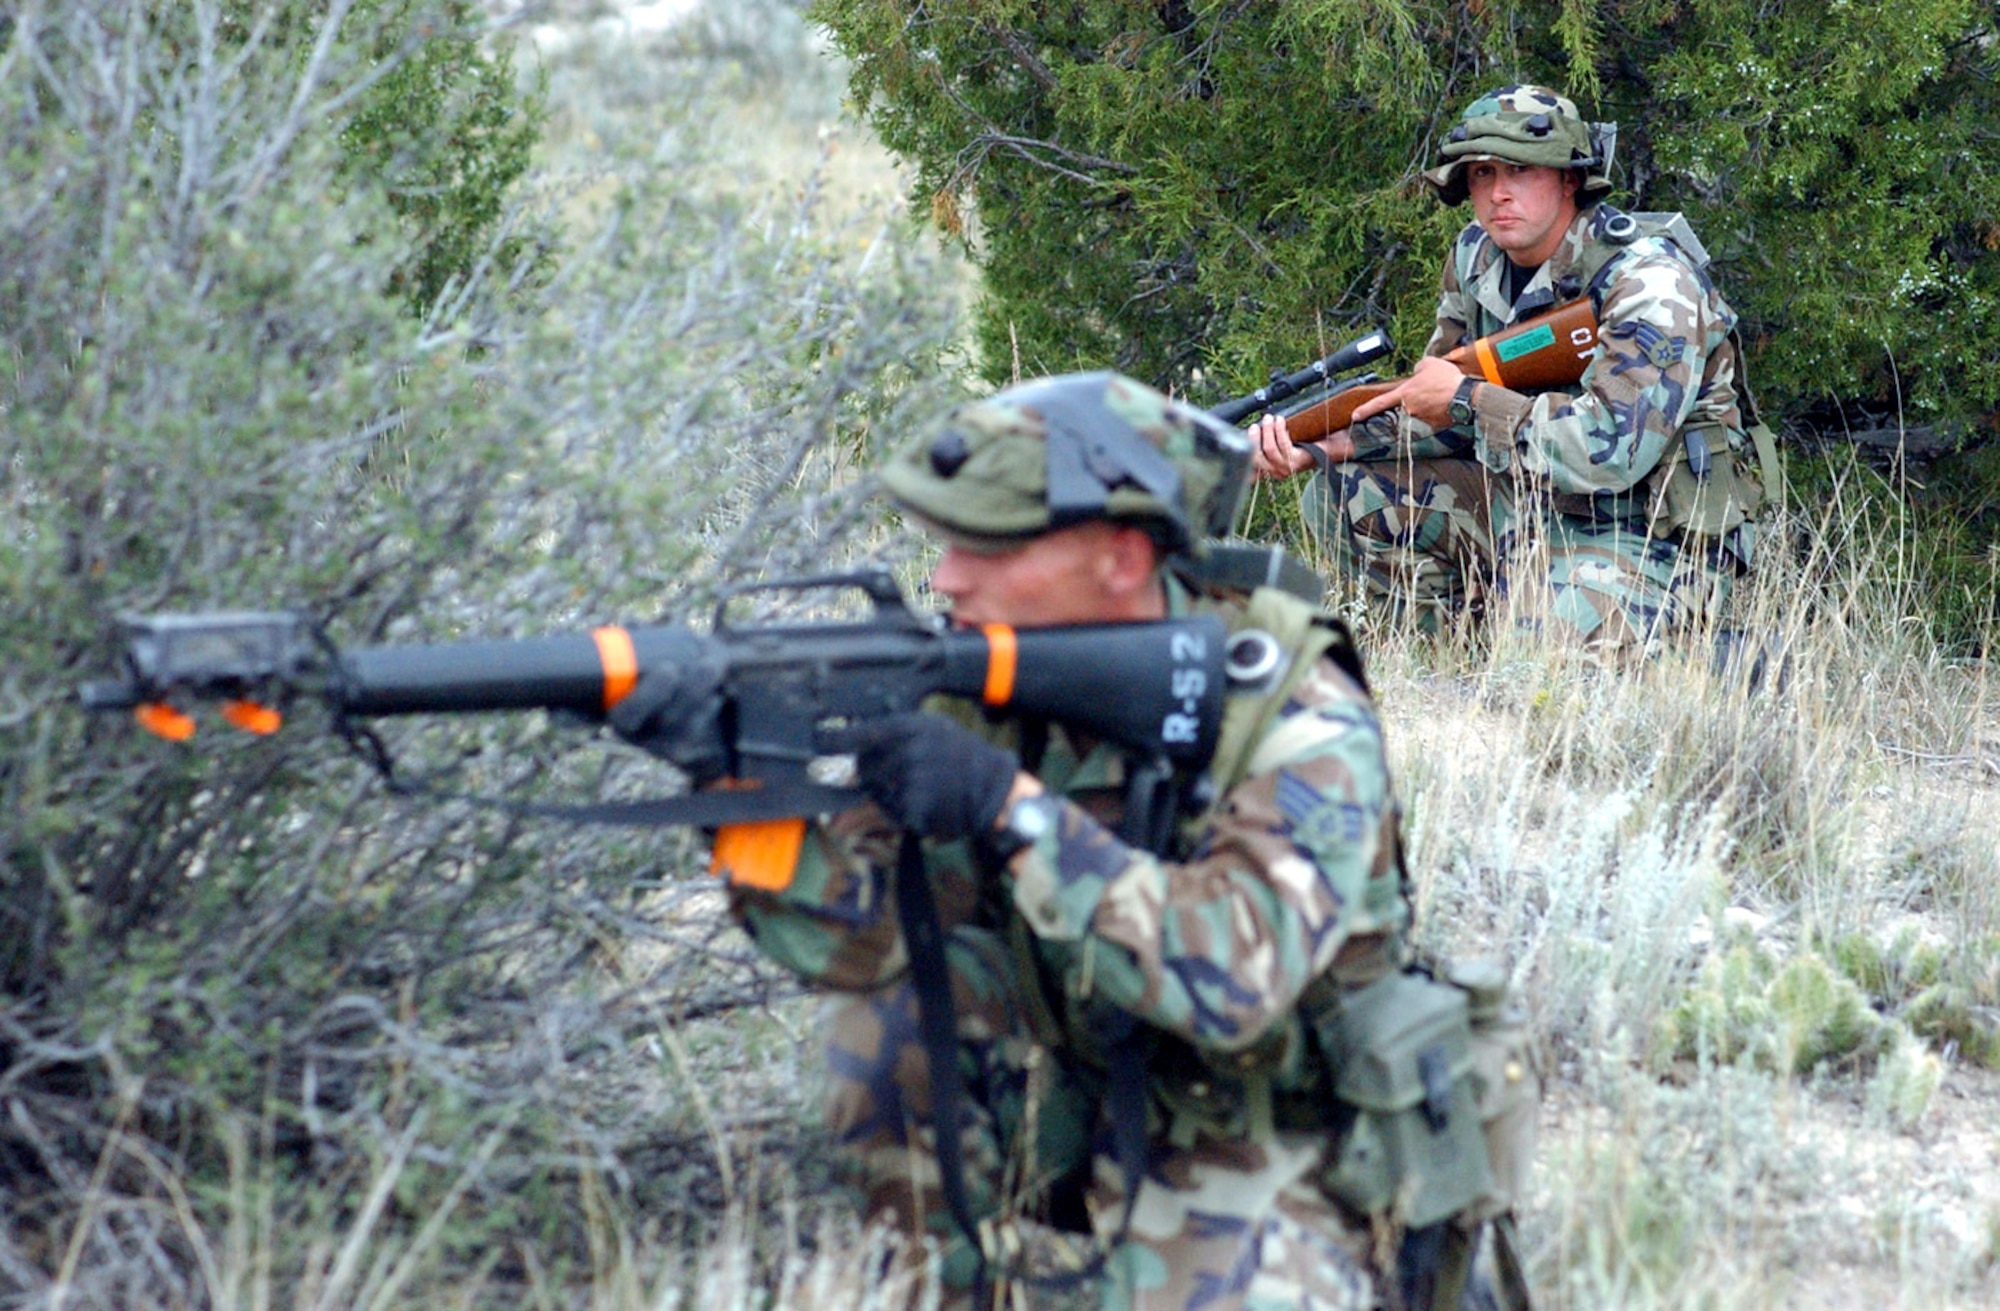 CAMP GUERNSEY, Wyo. -- Senior Airman Matthew James (left) returns fire as Senior Airman Landon Elledge watches his back during the Road Warrior III exercise here.  They are assigned to the 791st Missile Security Forces Squadron at Minot Air Force Base, N.D.  (U.S. Air Force photo by Master Sgt. Jeff Bohn)